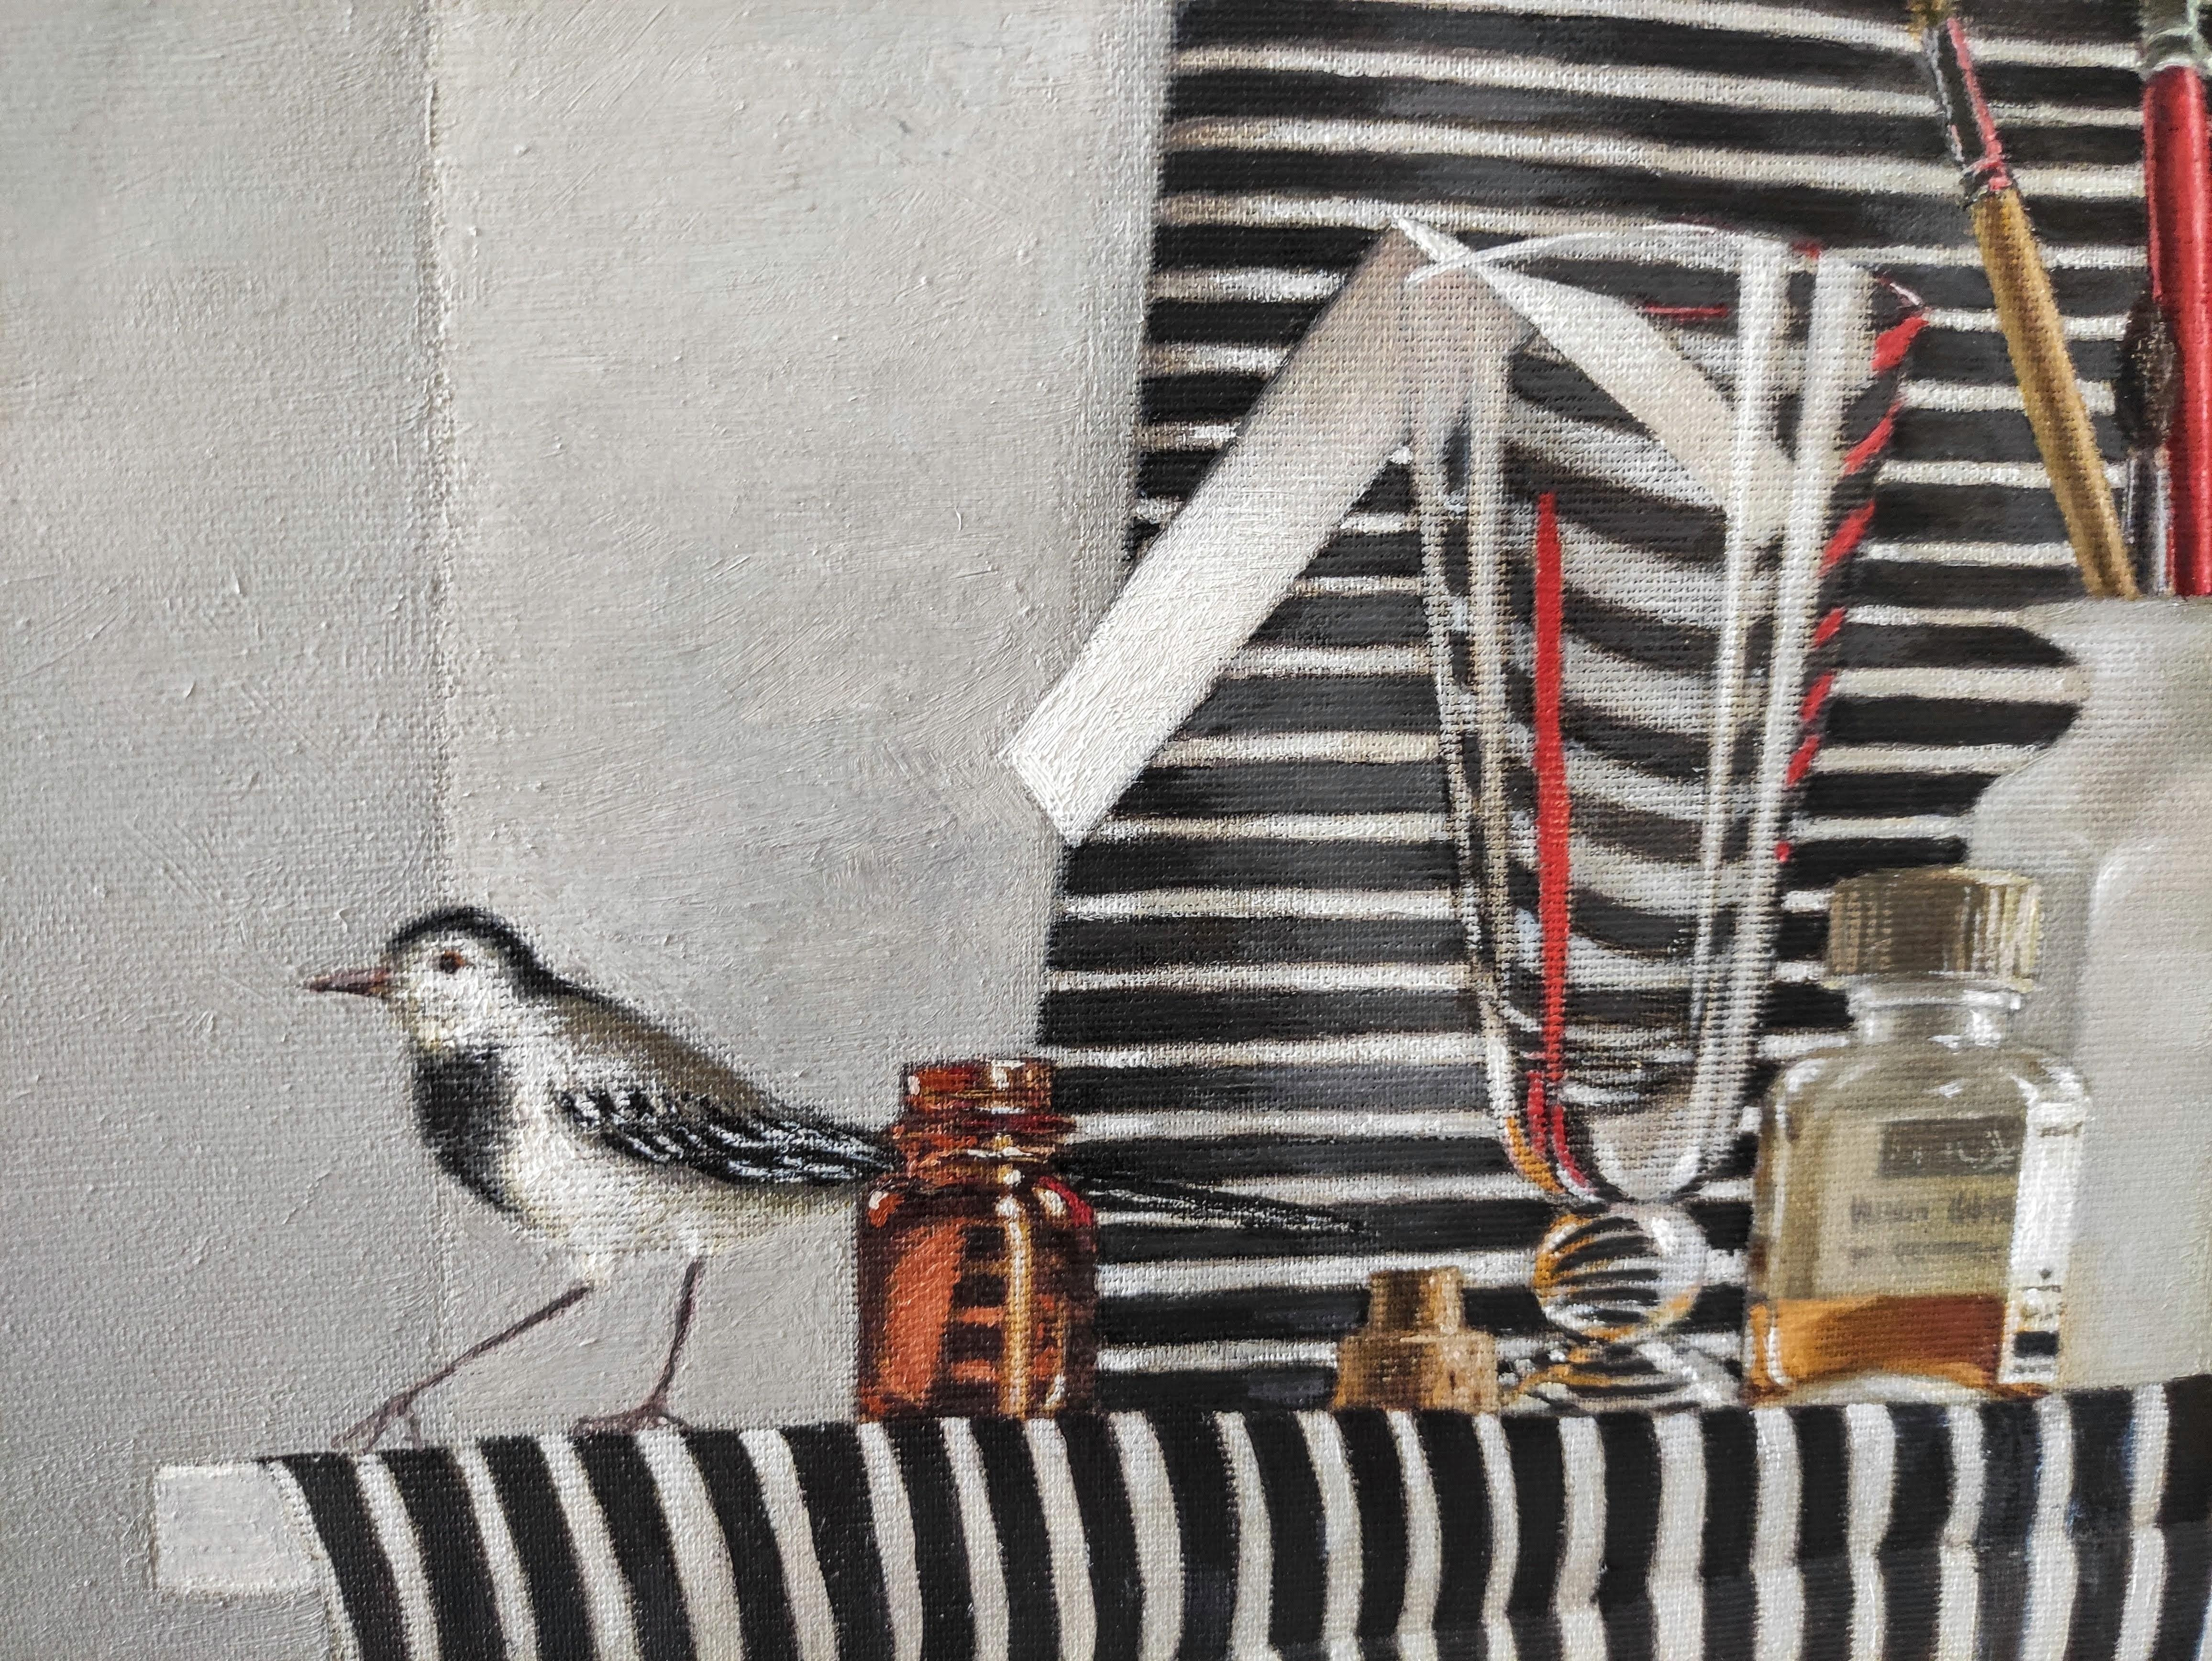 Still Life With Wagtails. 2011. Oil on linen, 40X45 cm - Painting by Tatyana Palchuk